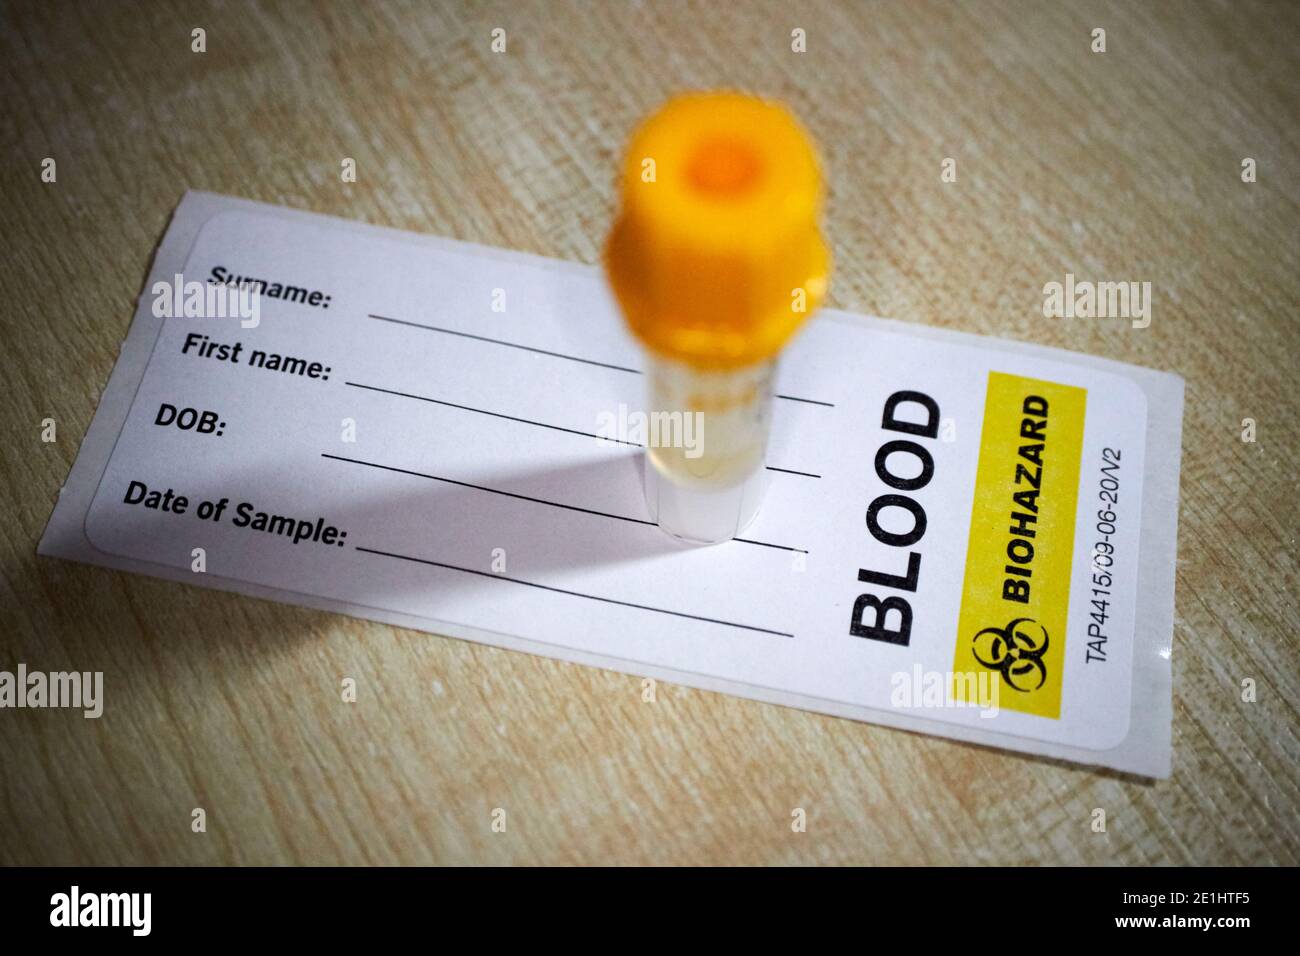 blood collection tube and label from commercial covid-19 antibody blood test kit for home testing for coronavirus antibodies received in the uk Stock Photo